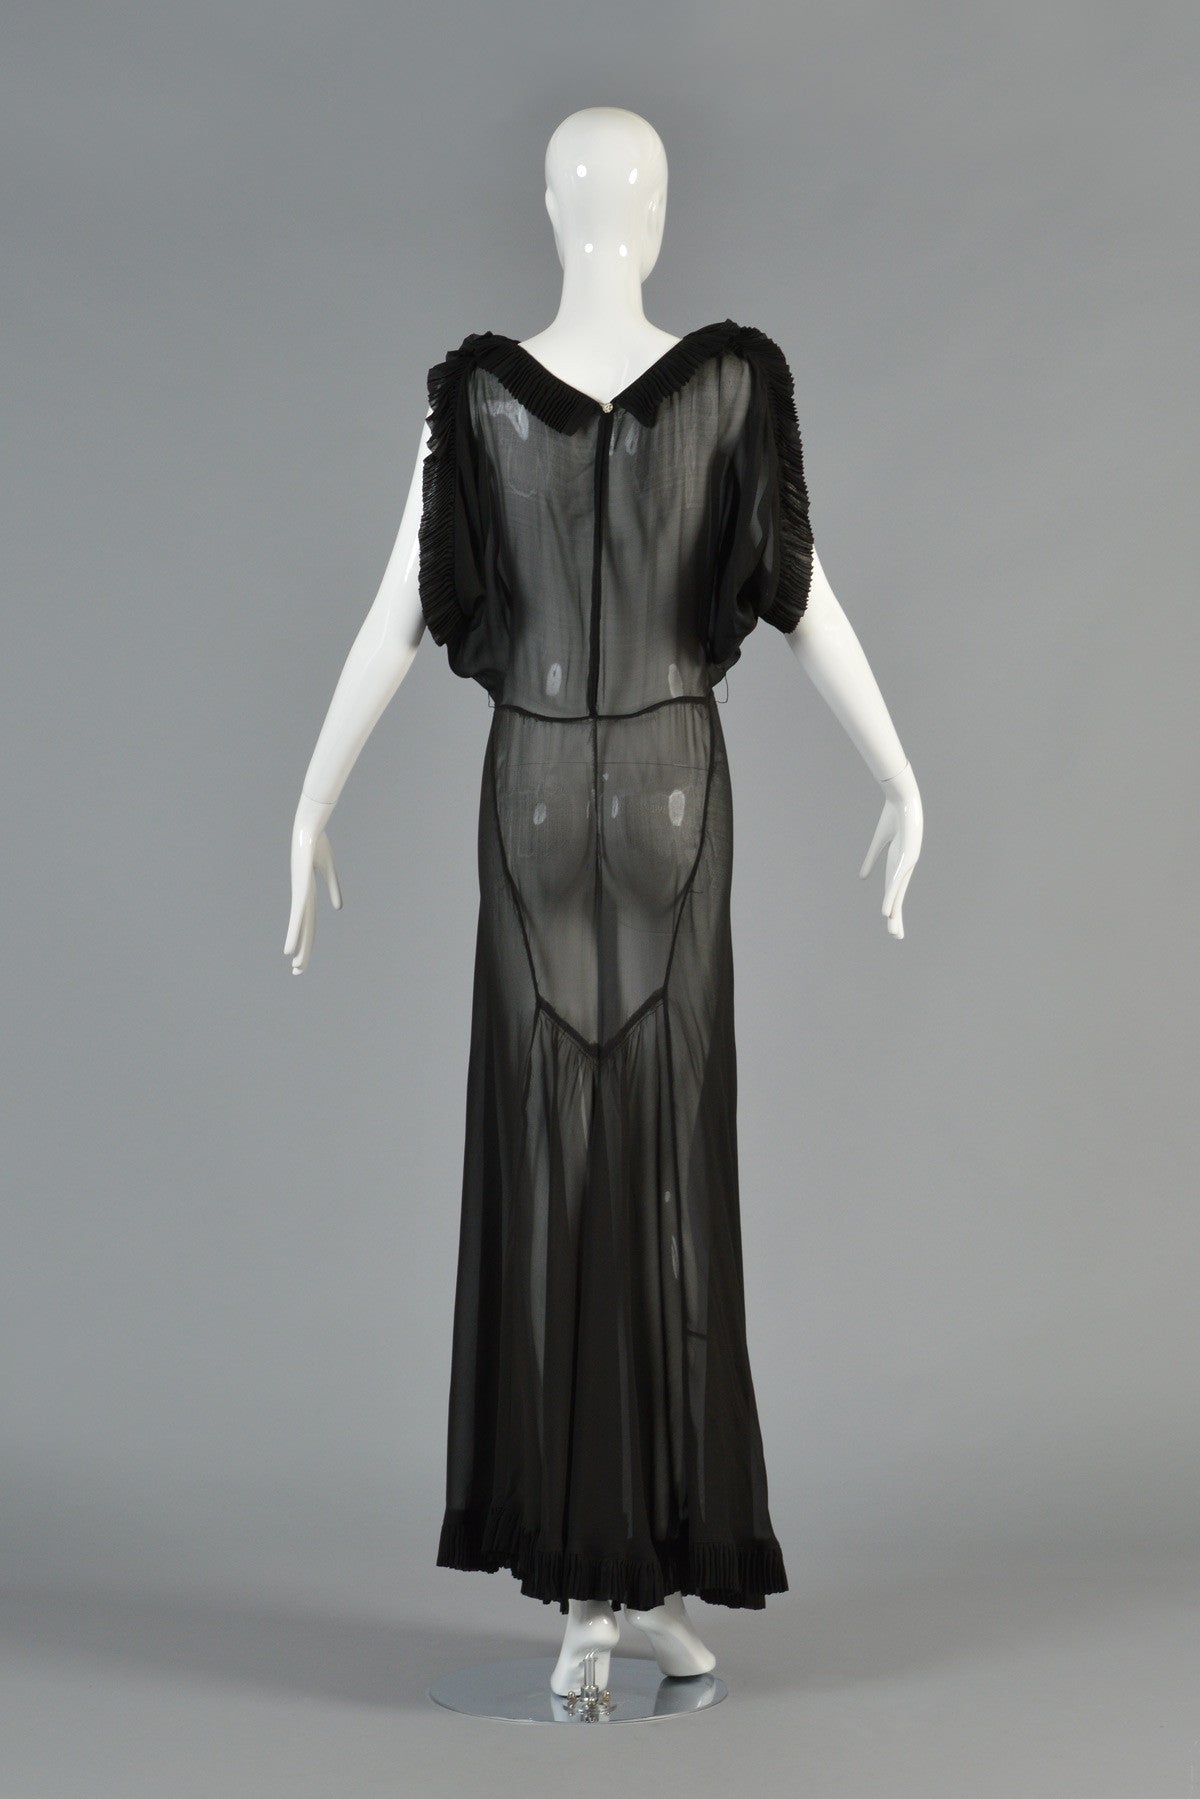 1930s Black Sheer Evening Gown w/Open Draped Sleeves | BUSTOWN MODERN